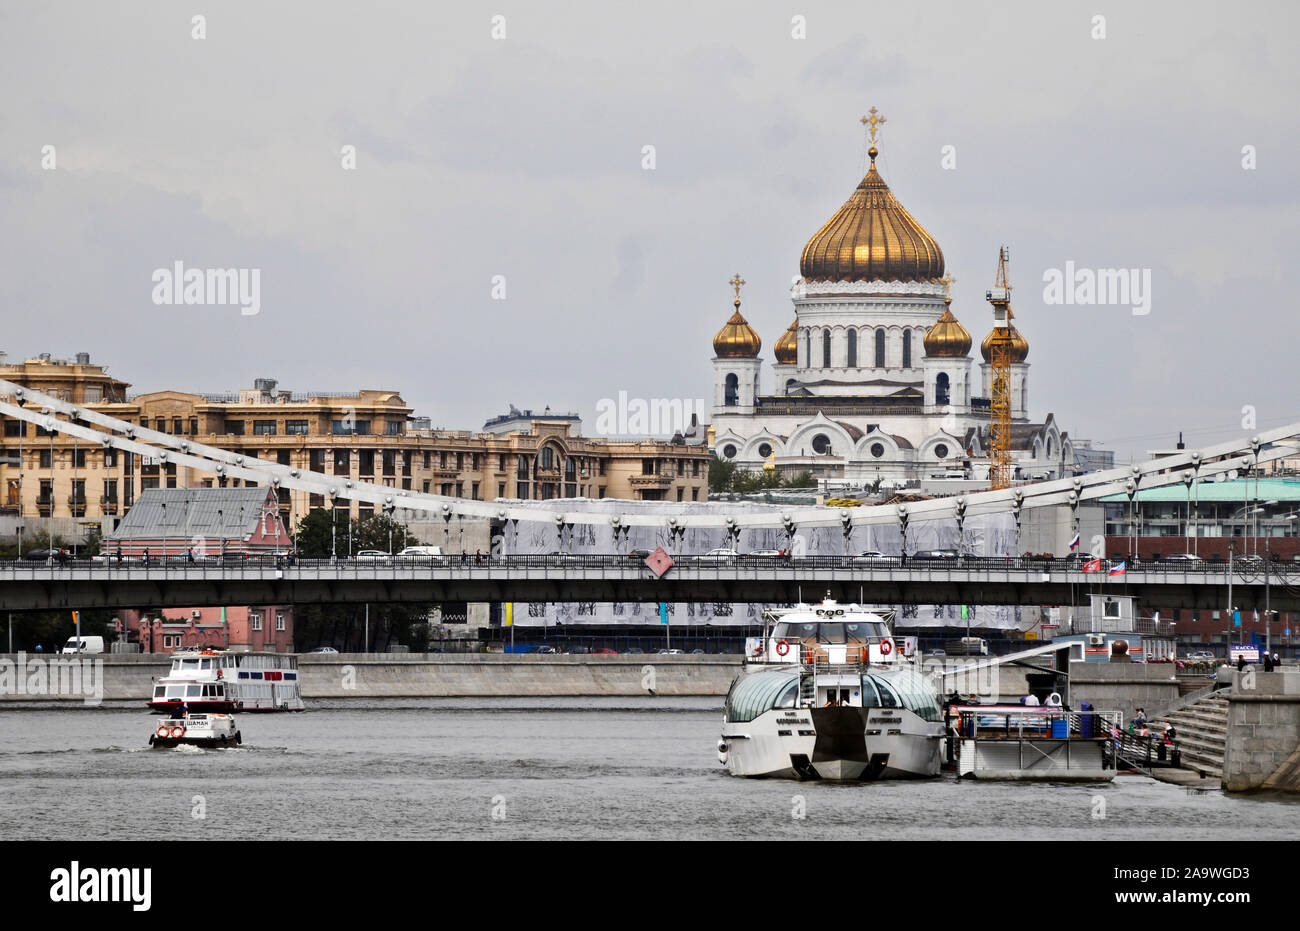 Cathedral of Christ the Savior, view from the Moskva River. Moscow, Russia Stock Photo